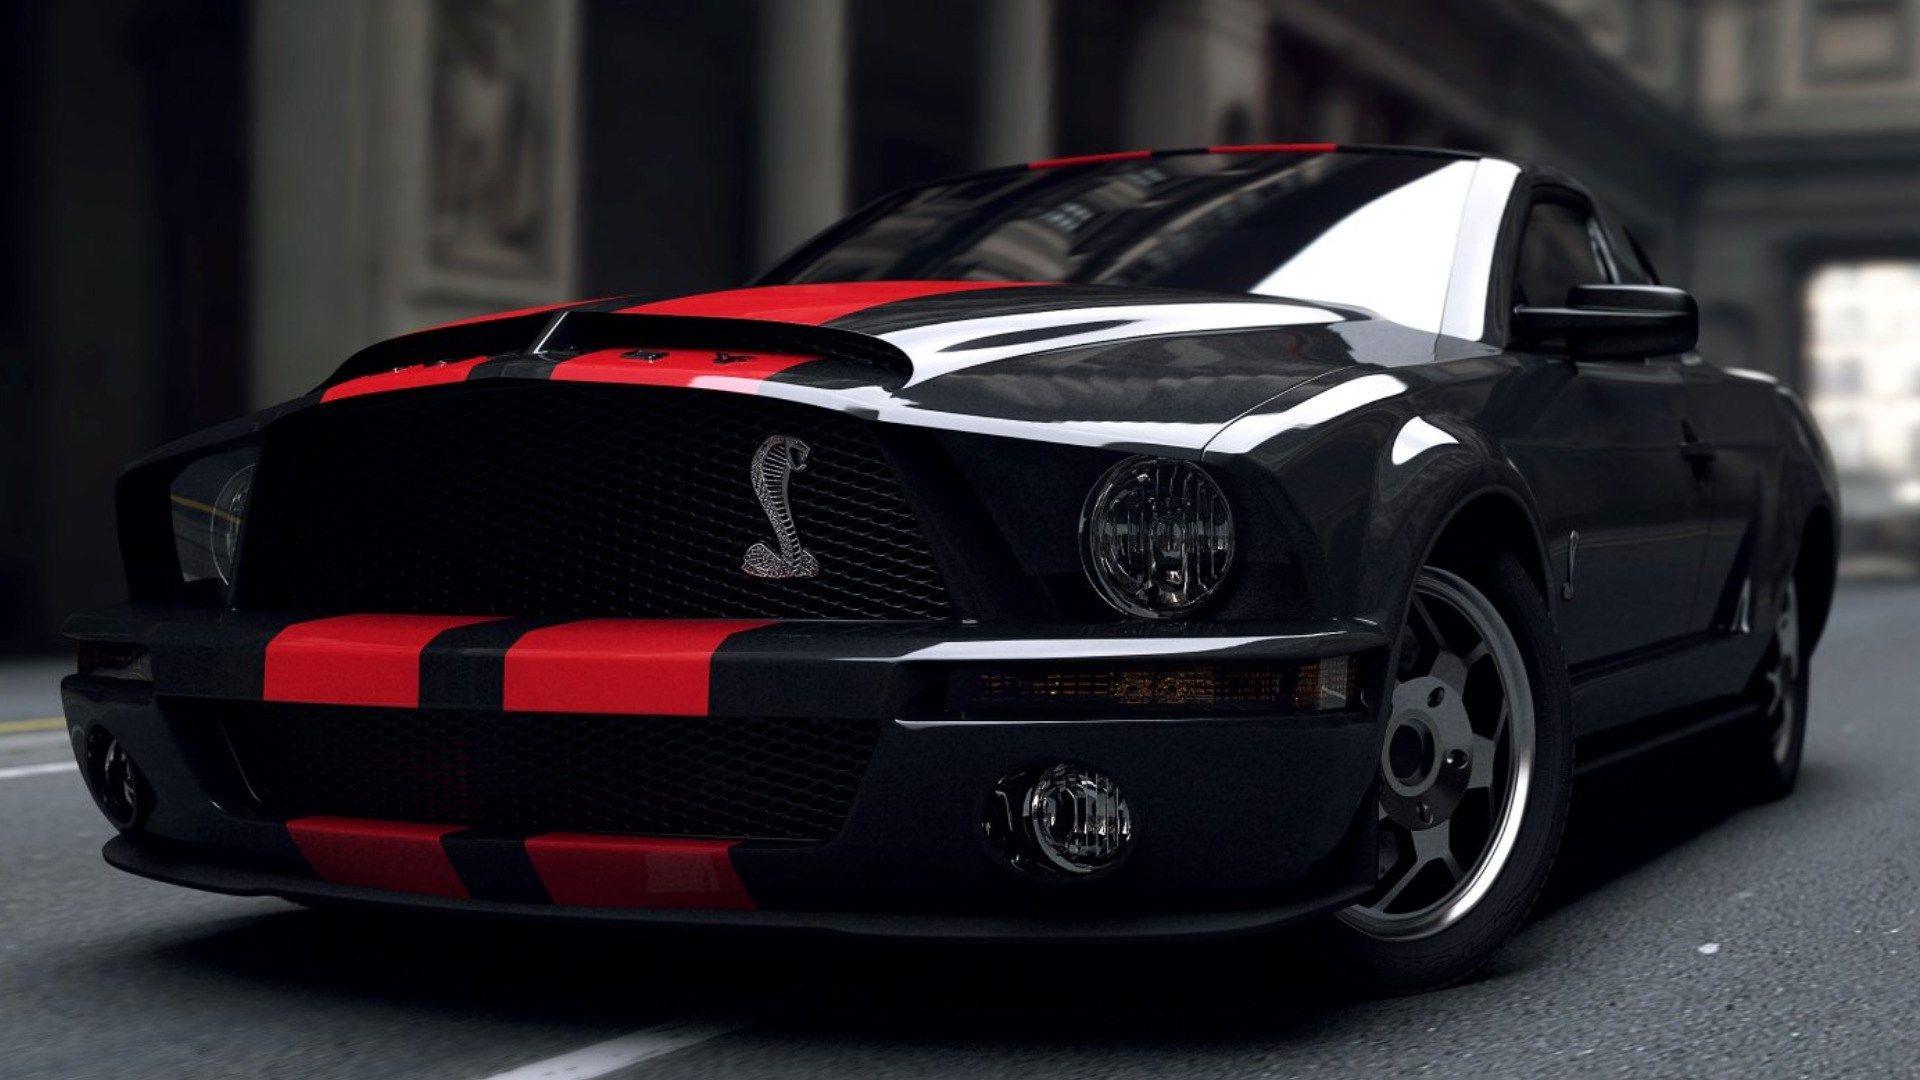 Ford Mustang Shelby GT500 Wallpaper 6 X 1080